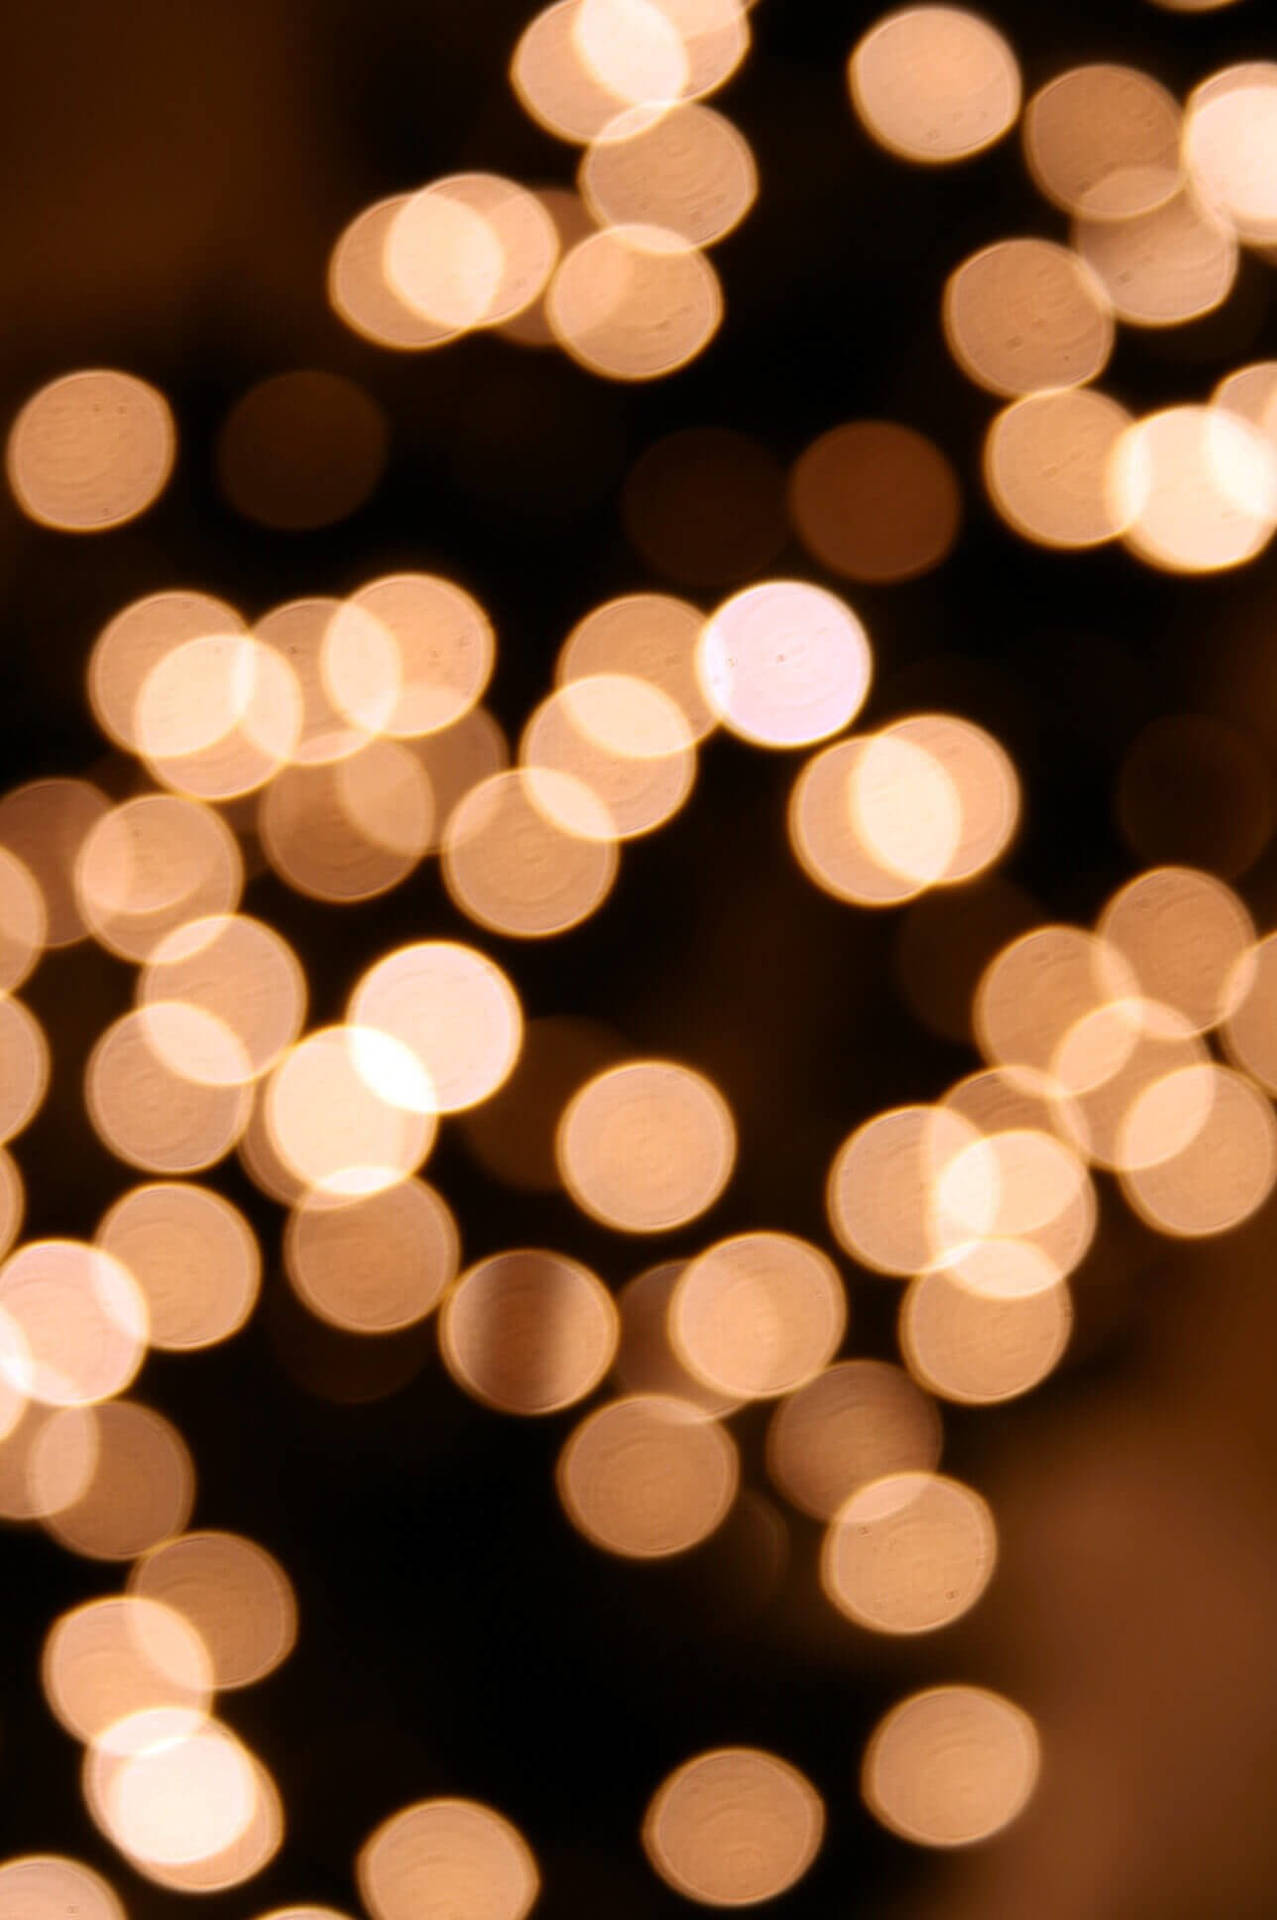 "Delicate Christmas lights in a warm, dreamy atmosphere". Wallpaper